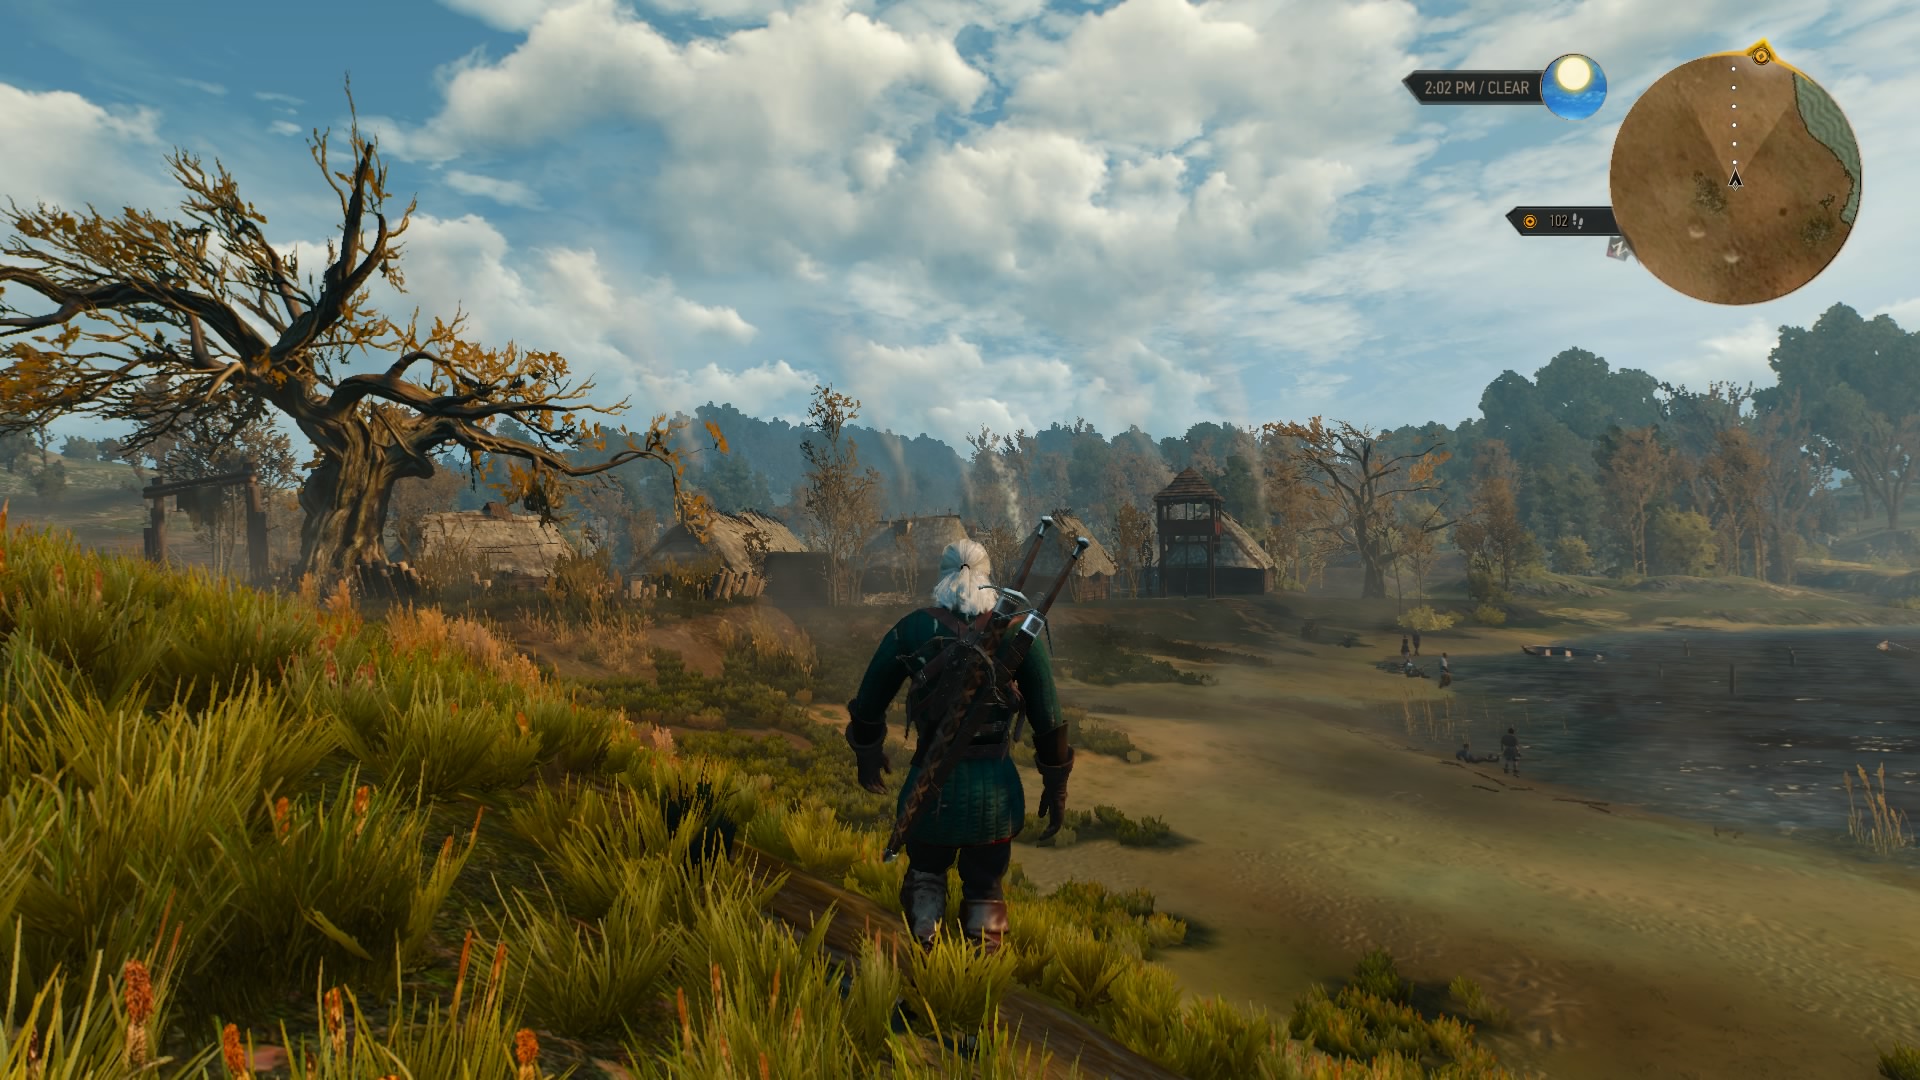 the_witcher_ps4_3_by_chabbles-d8vk44a.jpg